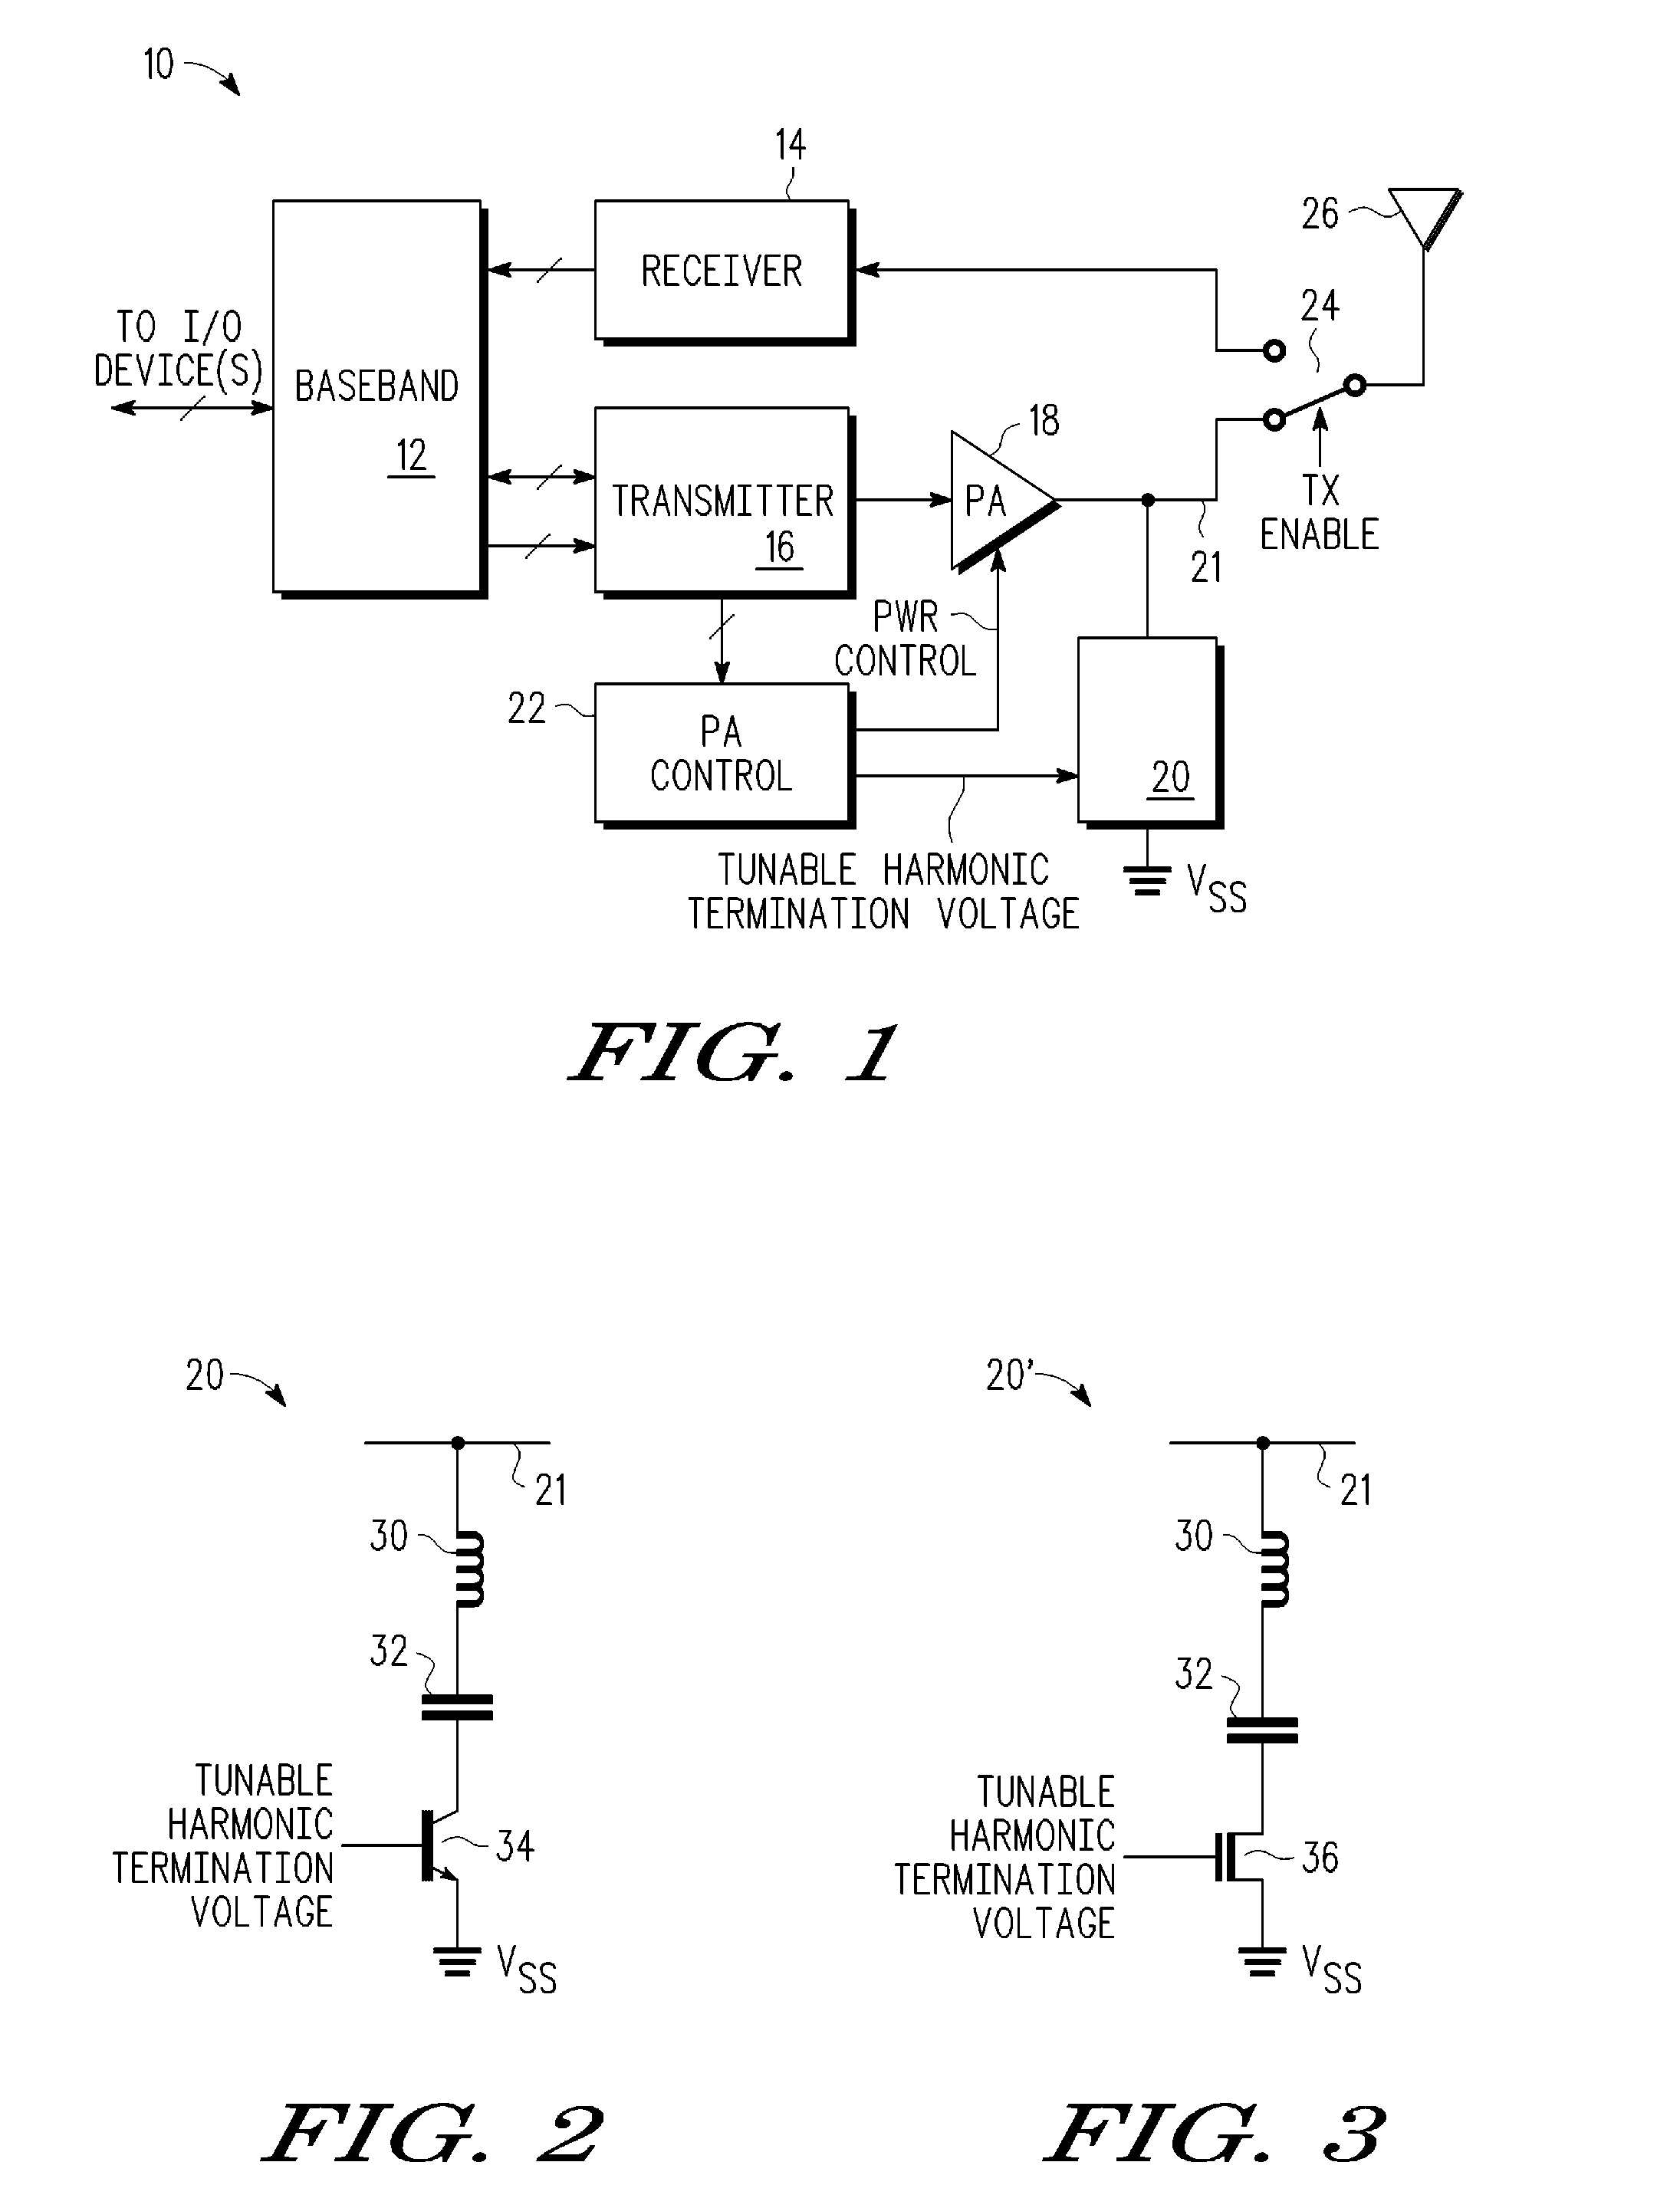 Multi-mode transceiver having tunable harmonic termination circuit and method therefor